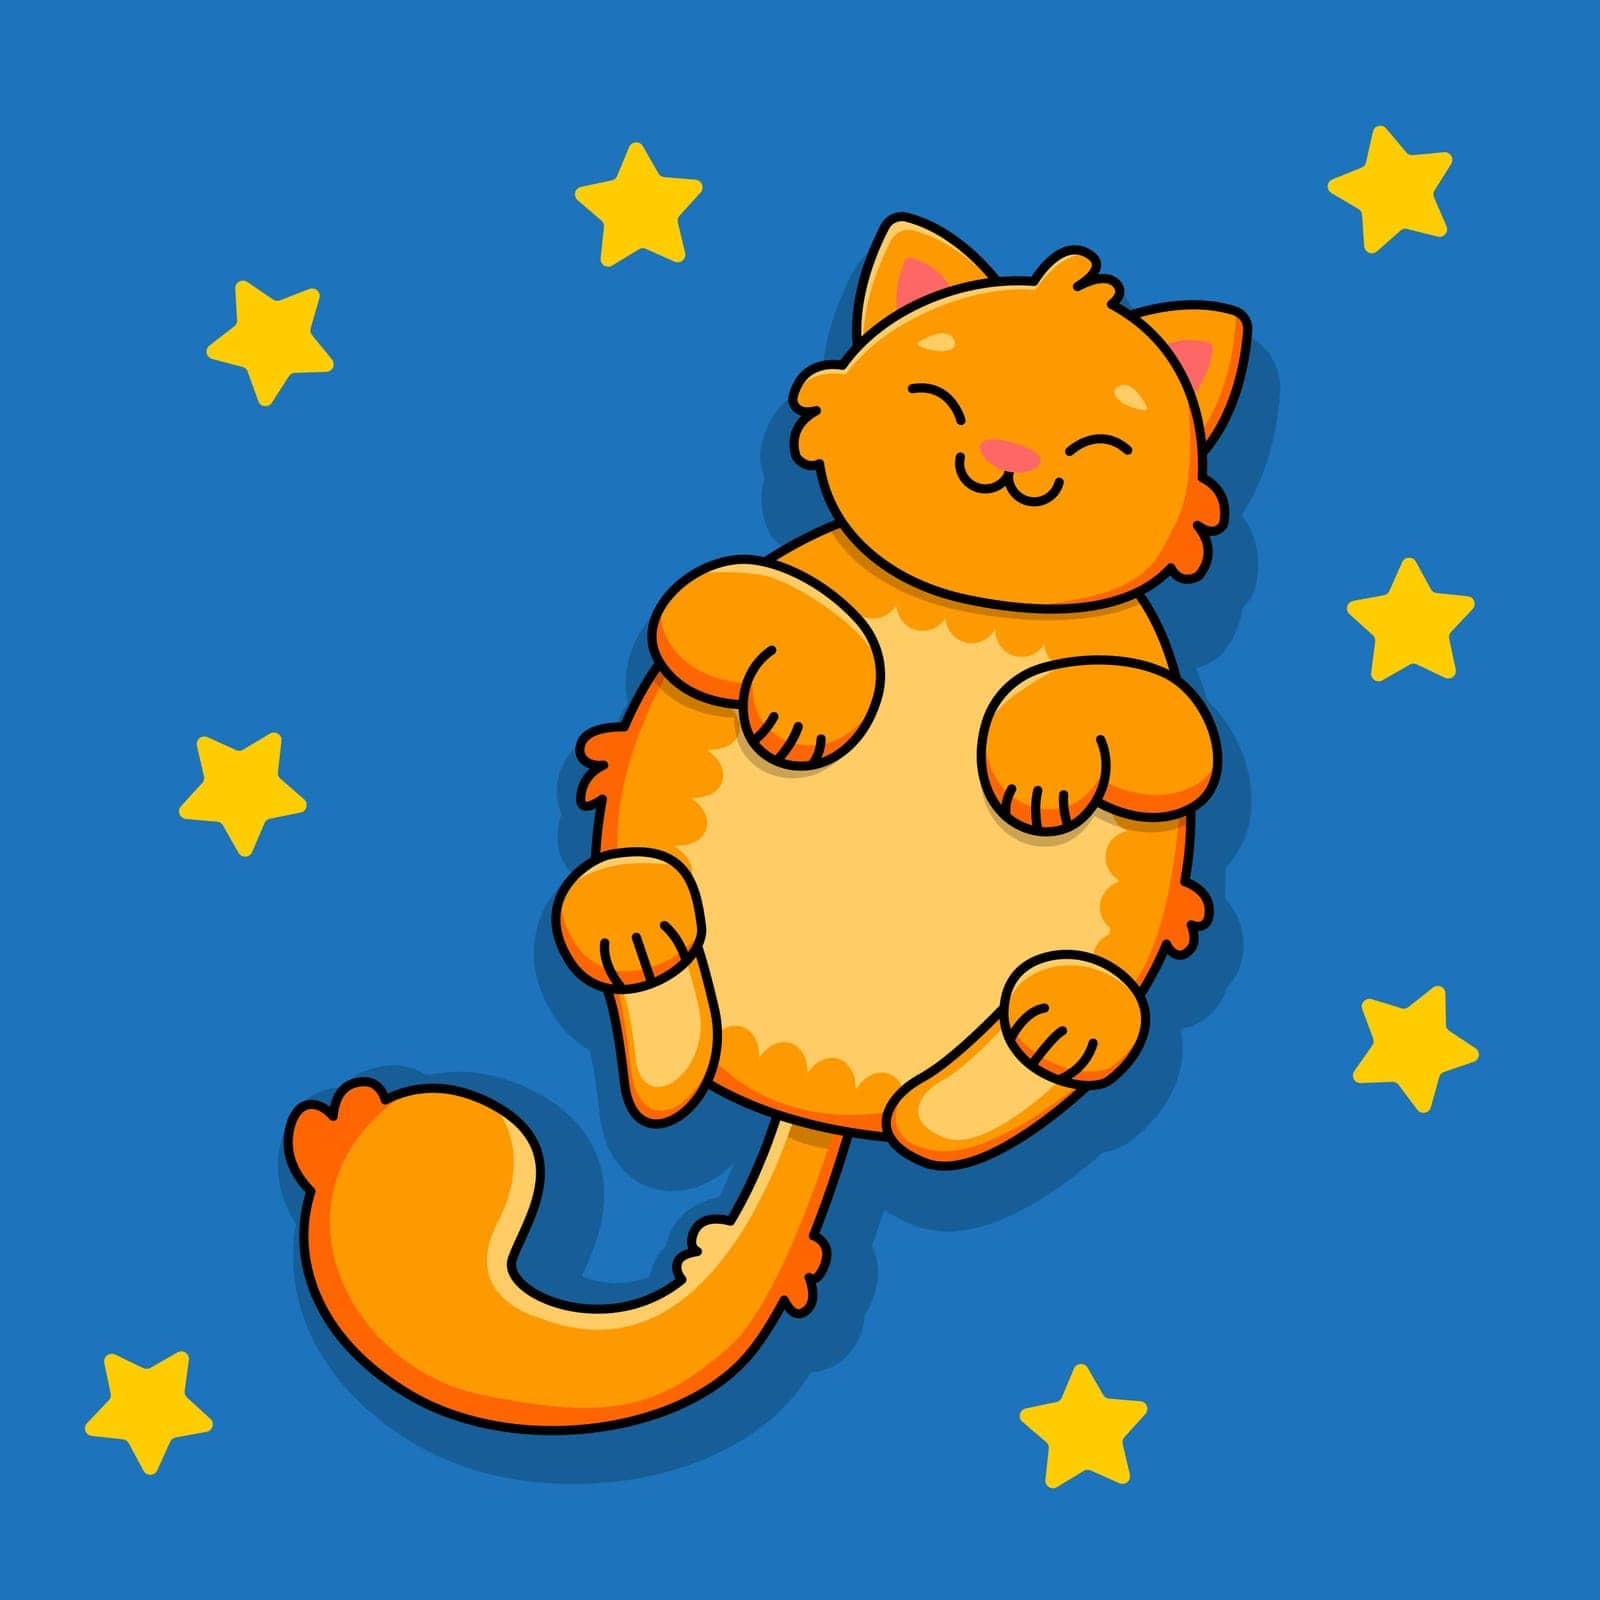 Sleeping smiling ginger cat on a blue background. Blue sky and yellow stars. Vector illustration